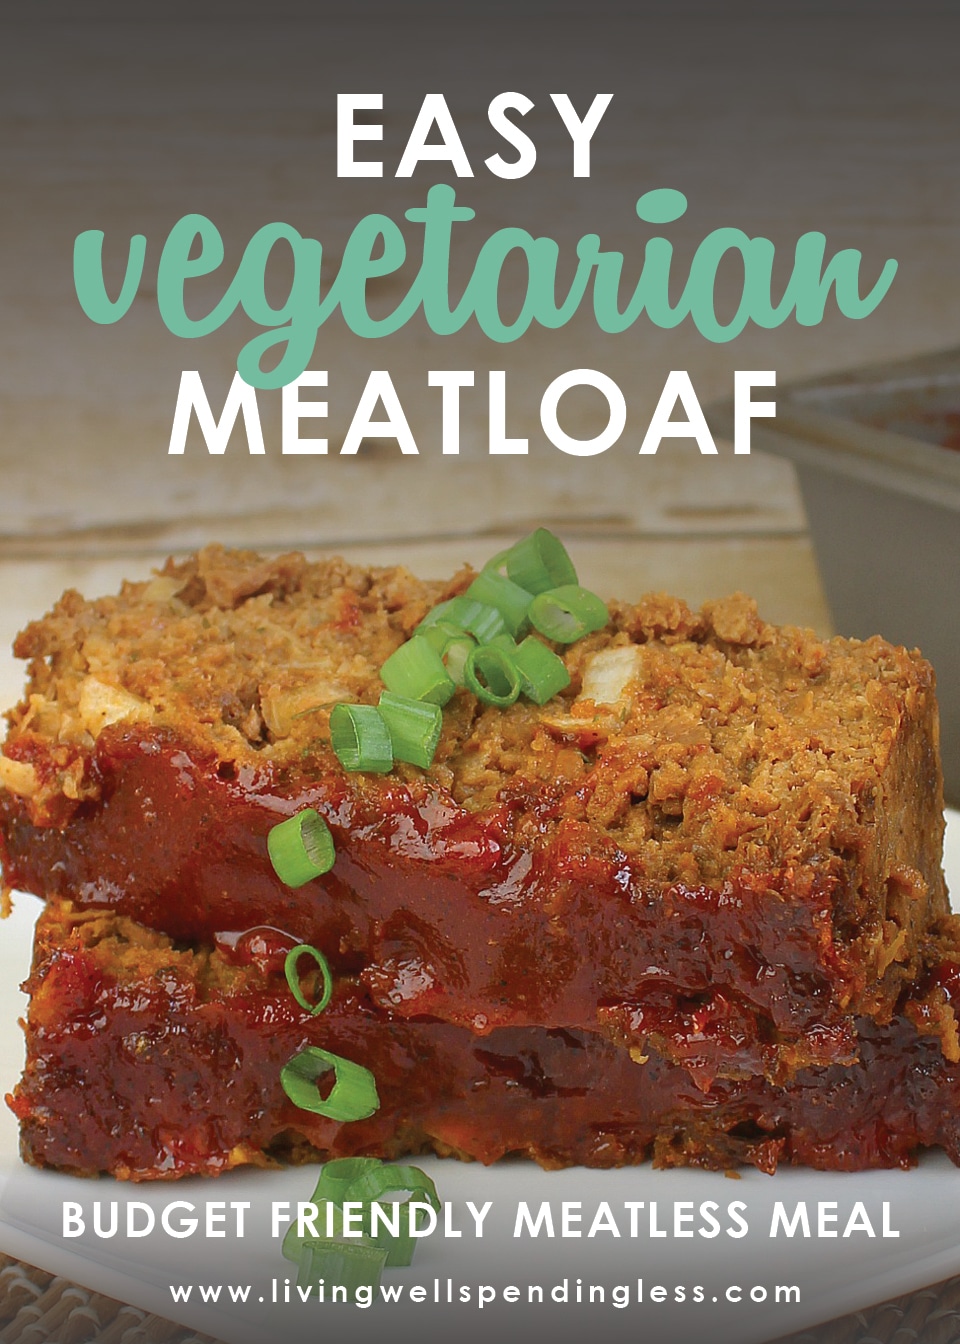 Craving good old fashioned comfort food without the guilt? Don't miss this freezer friendly vegetarian meatloaf with step-by-step directions! 